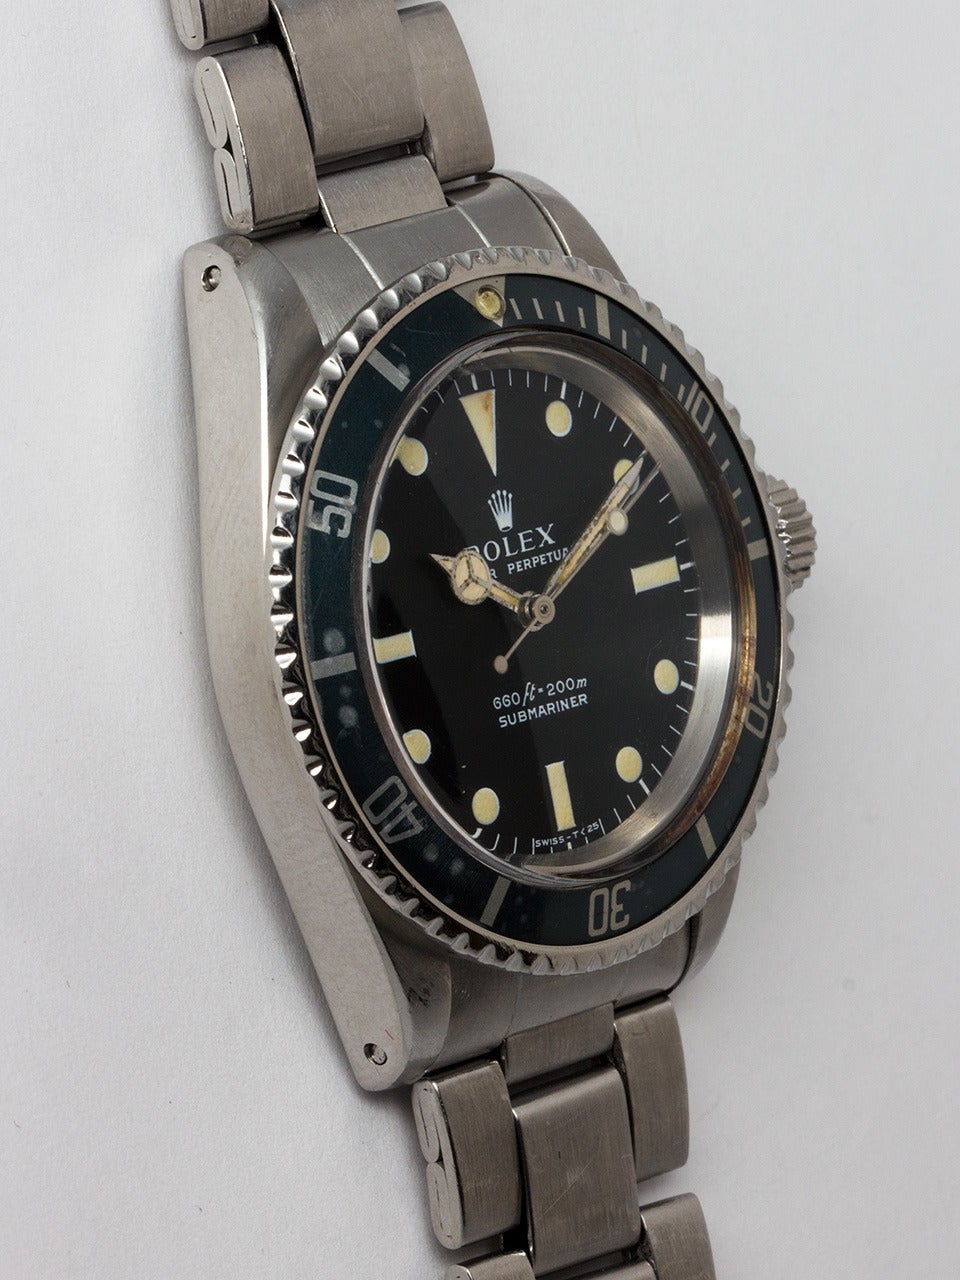 Rolex Stainless Steel Submariner Wristwatch ref 5513 serial #1.4 million circa 1966. 40mm diameter case with bi-directional elapsed time bezel, faded original matte black elapsed time bezel. Original very pleasing condition matte black feet first